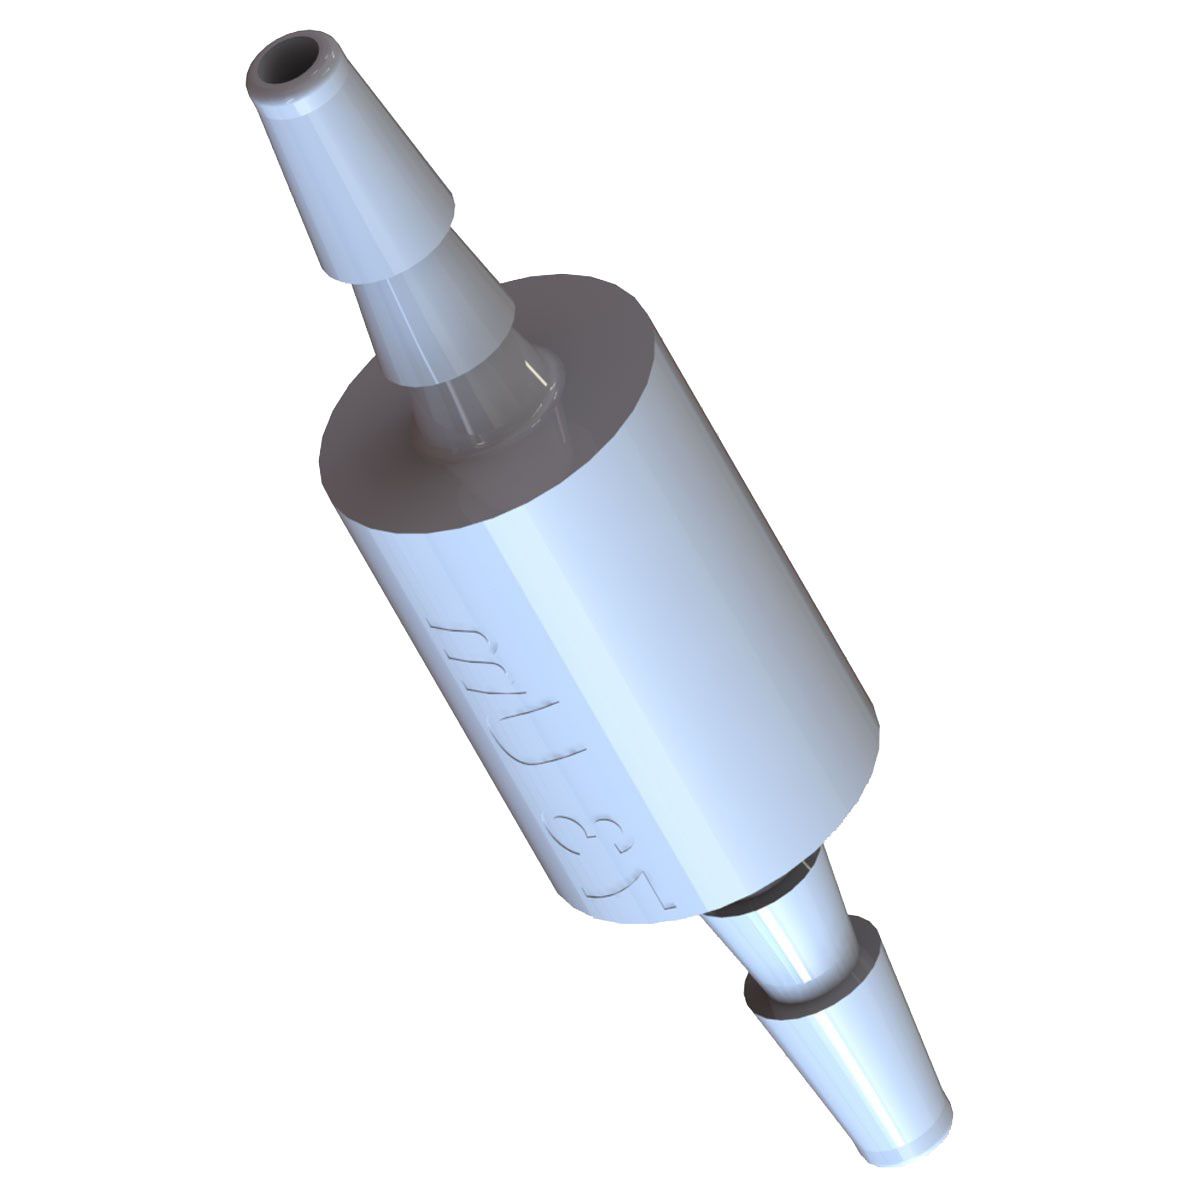 In-Line Miniature Disposable Filter -  73 Micron Dutch Weave Stainless Steel Screen - 1/16 (1.6mm) Barbed Ports - Polysulfone